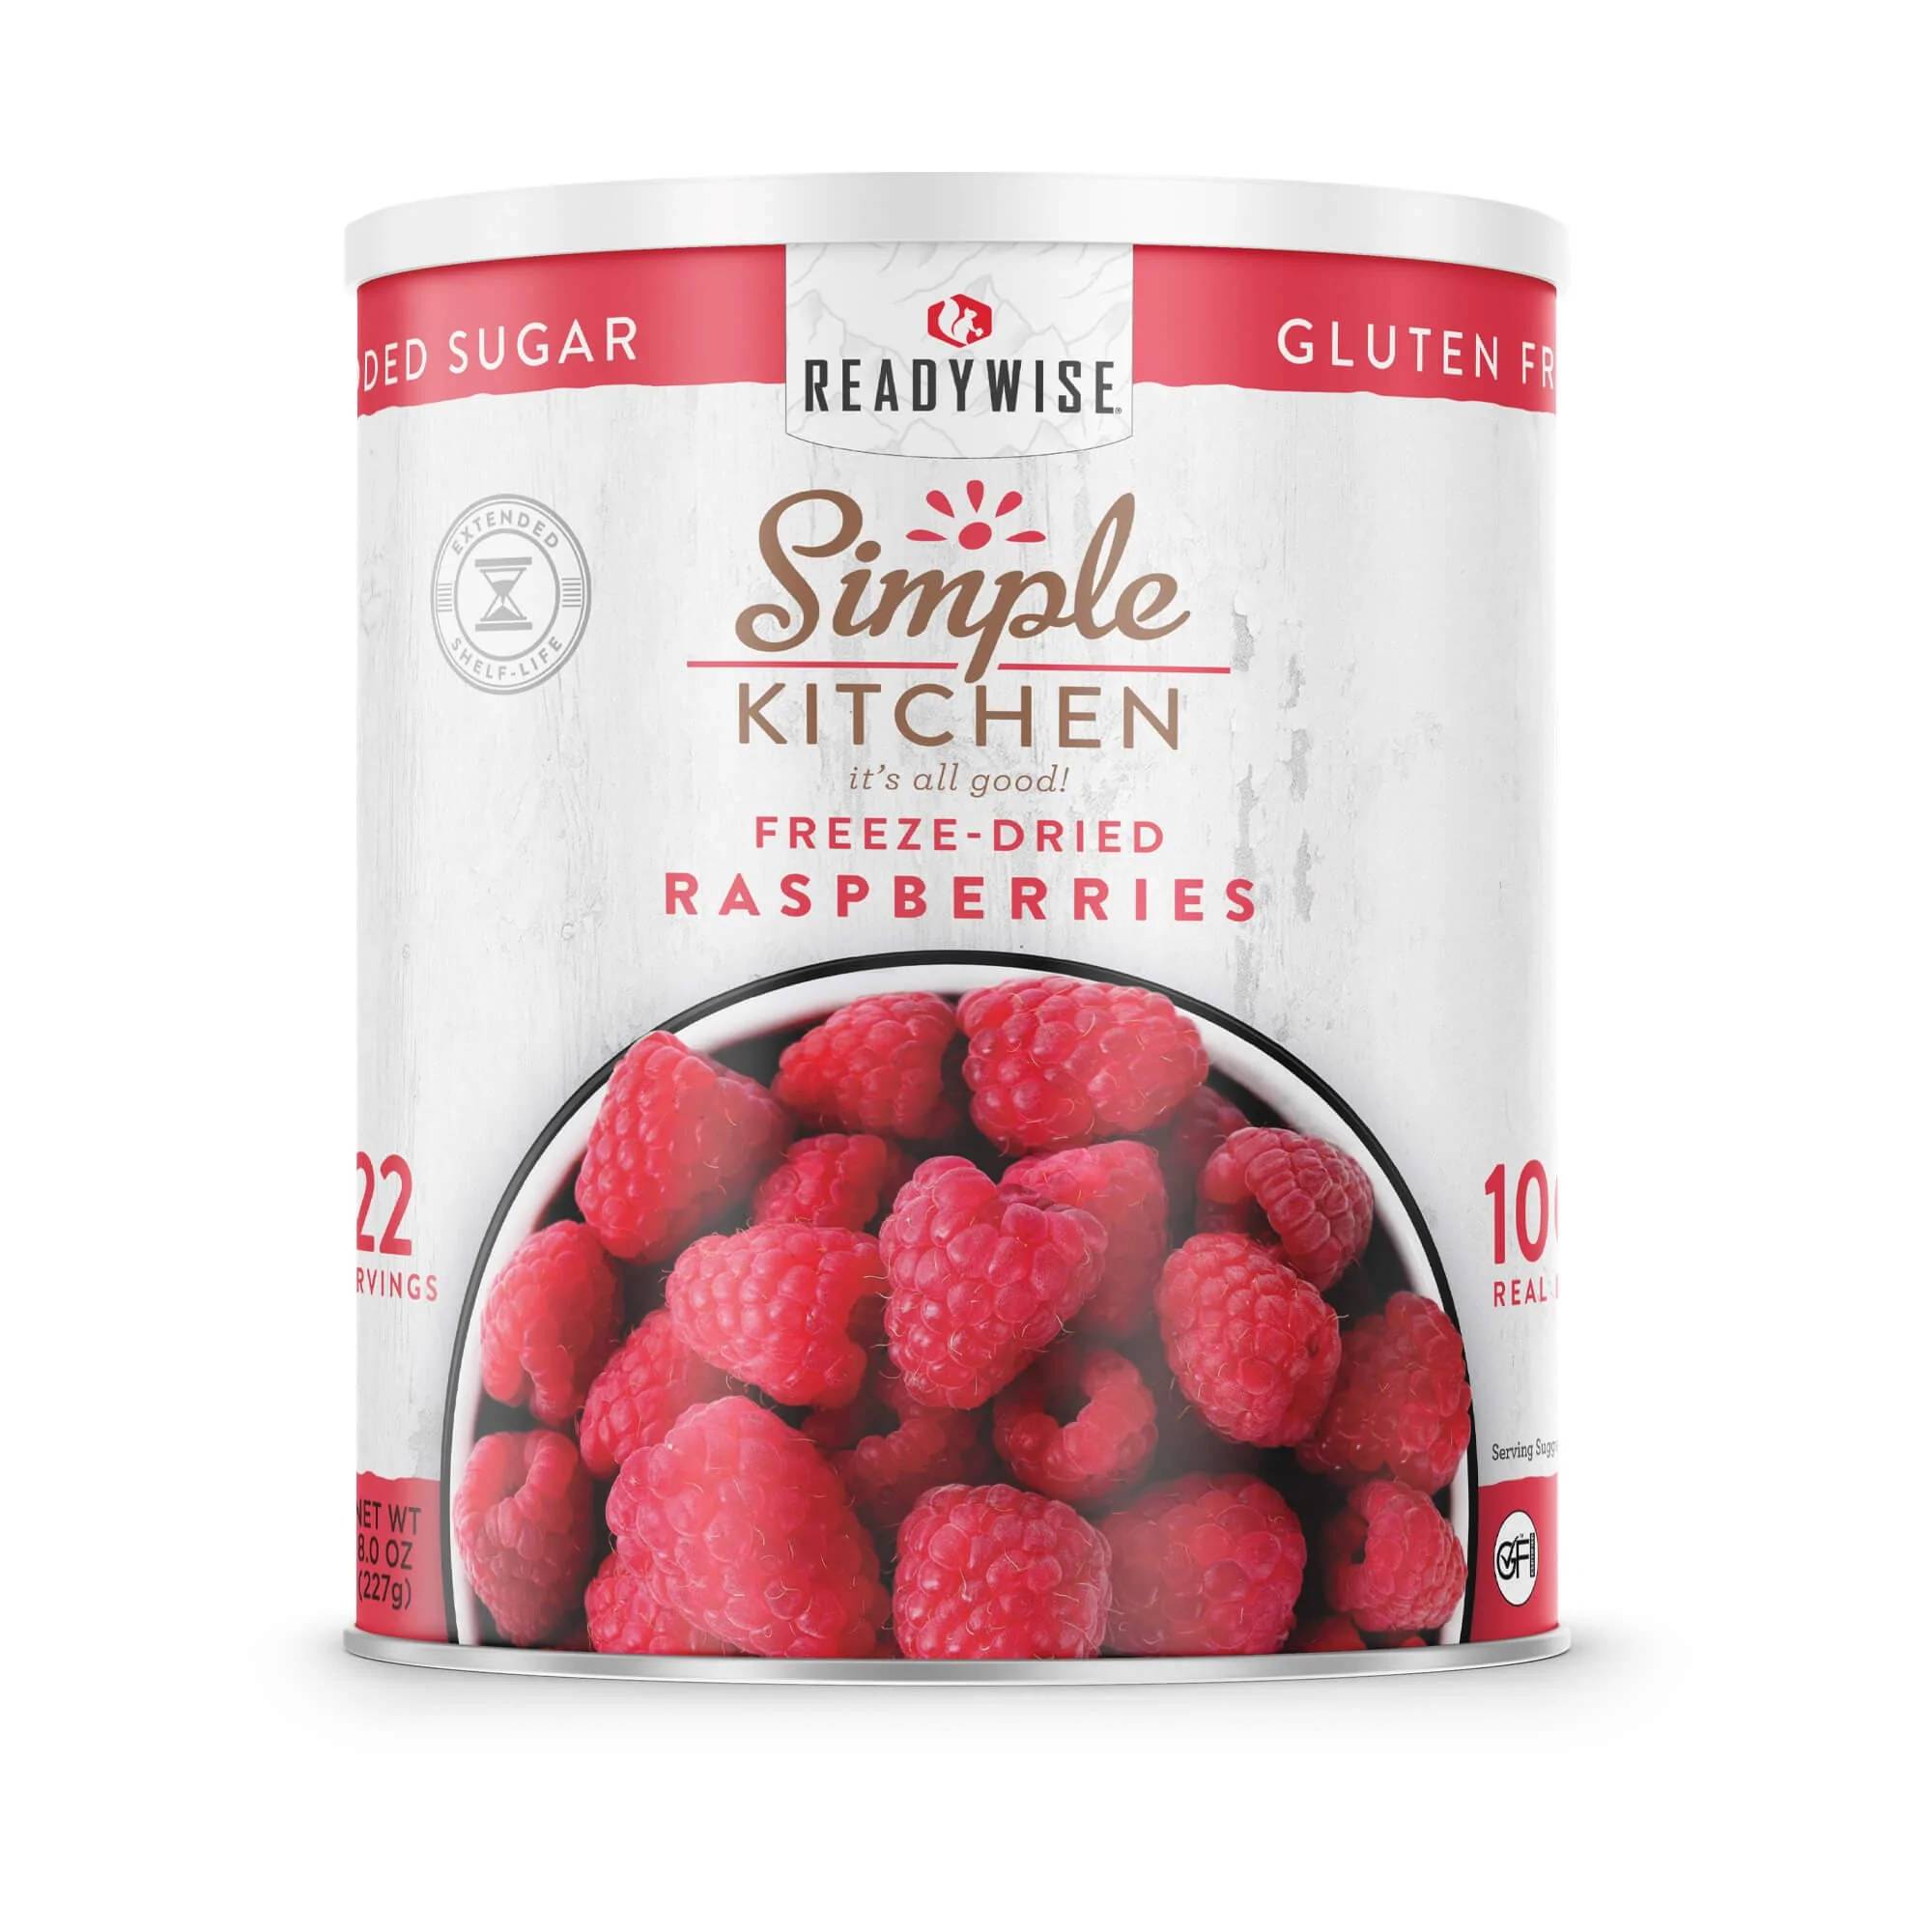 A can of freeze-dried raspberry granola that ships in 1-2 weeks.